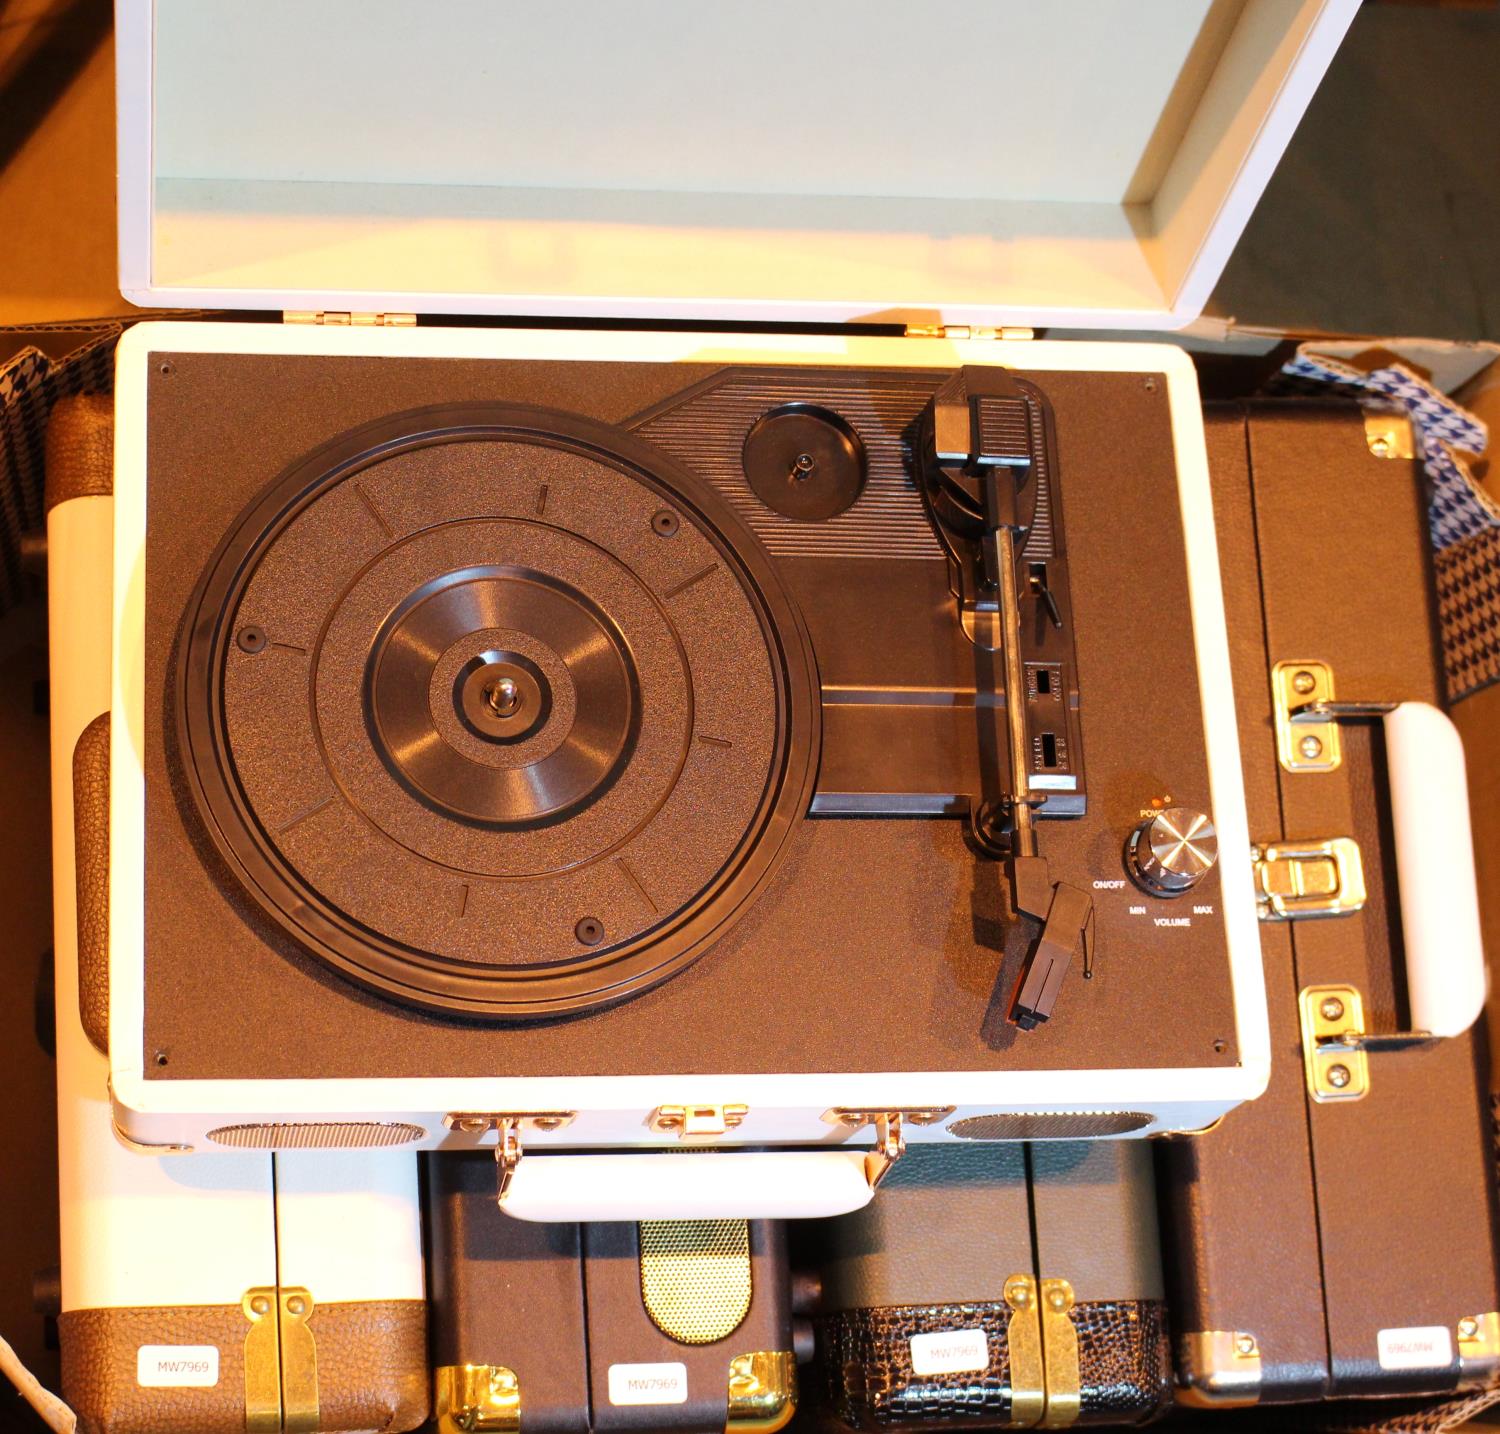 5 x GPO briefcase record players for spares & repairs, 2 x Soho, 2 x Ambassador and I Attache. Not